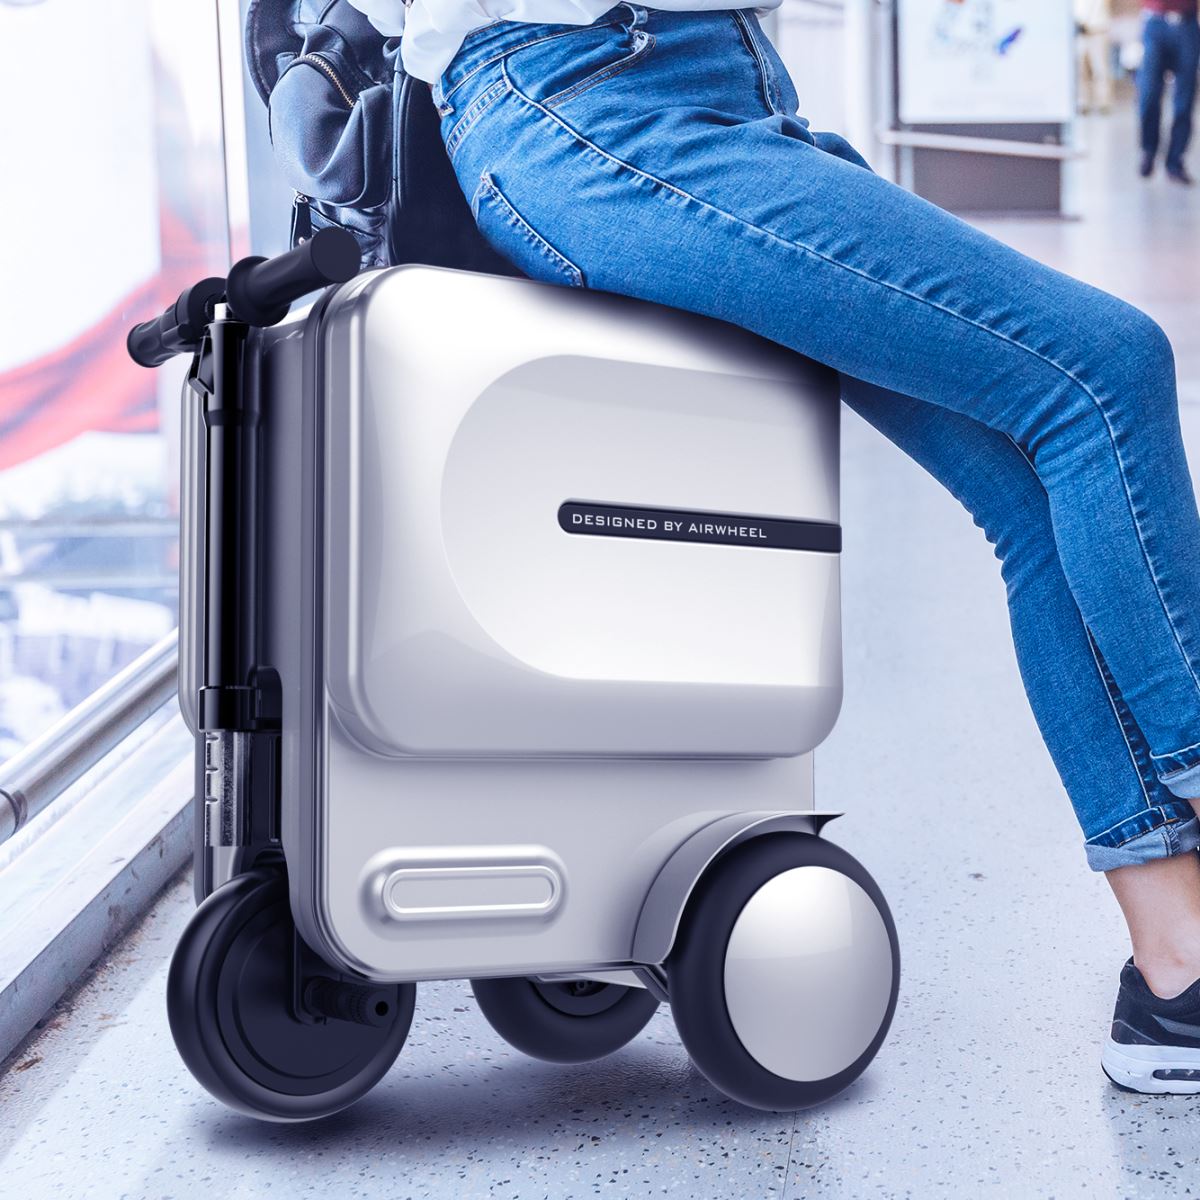 airwheel se3 rideable carry on luggage(1).